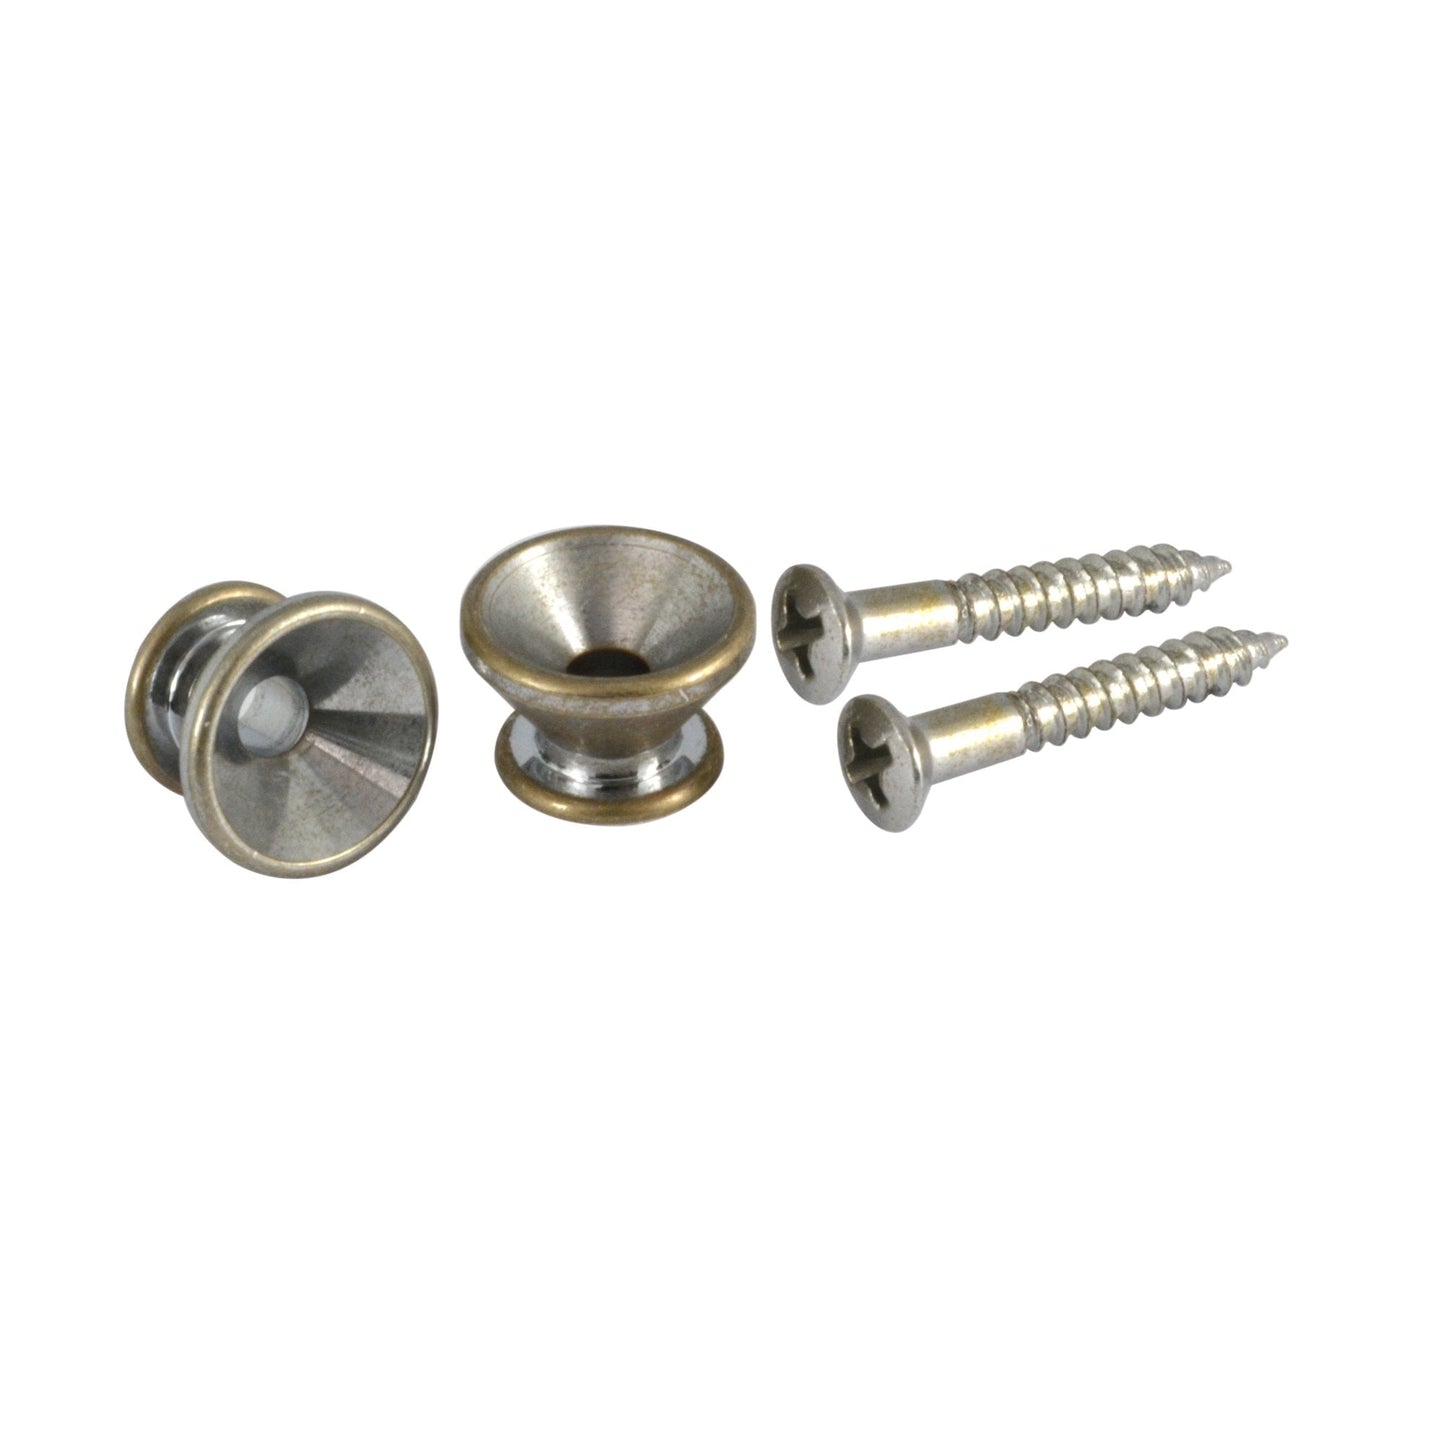 Strap Buttons With Screws (Set of 2)